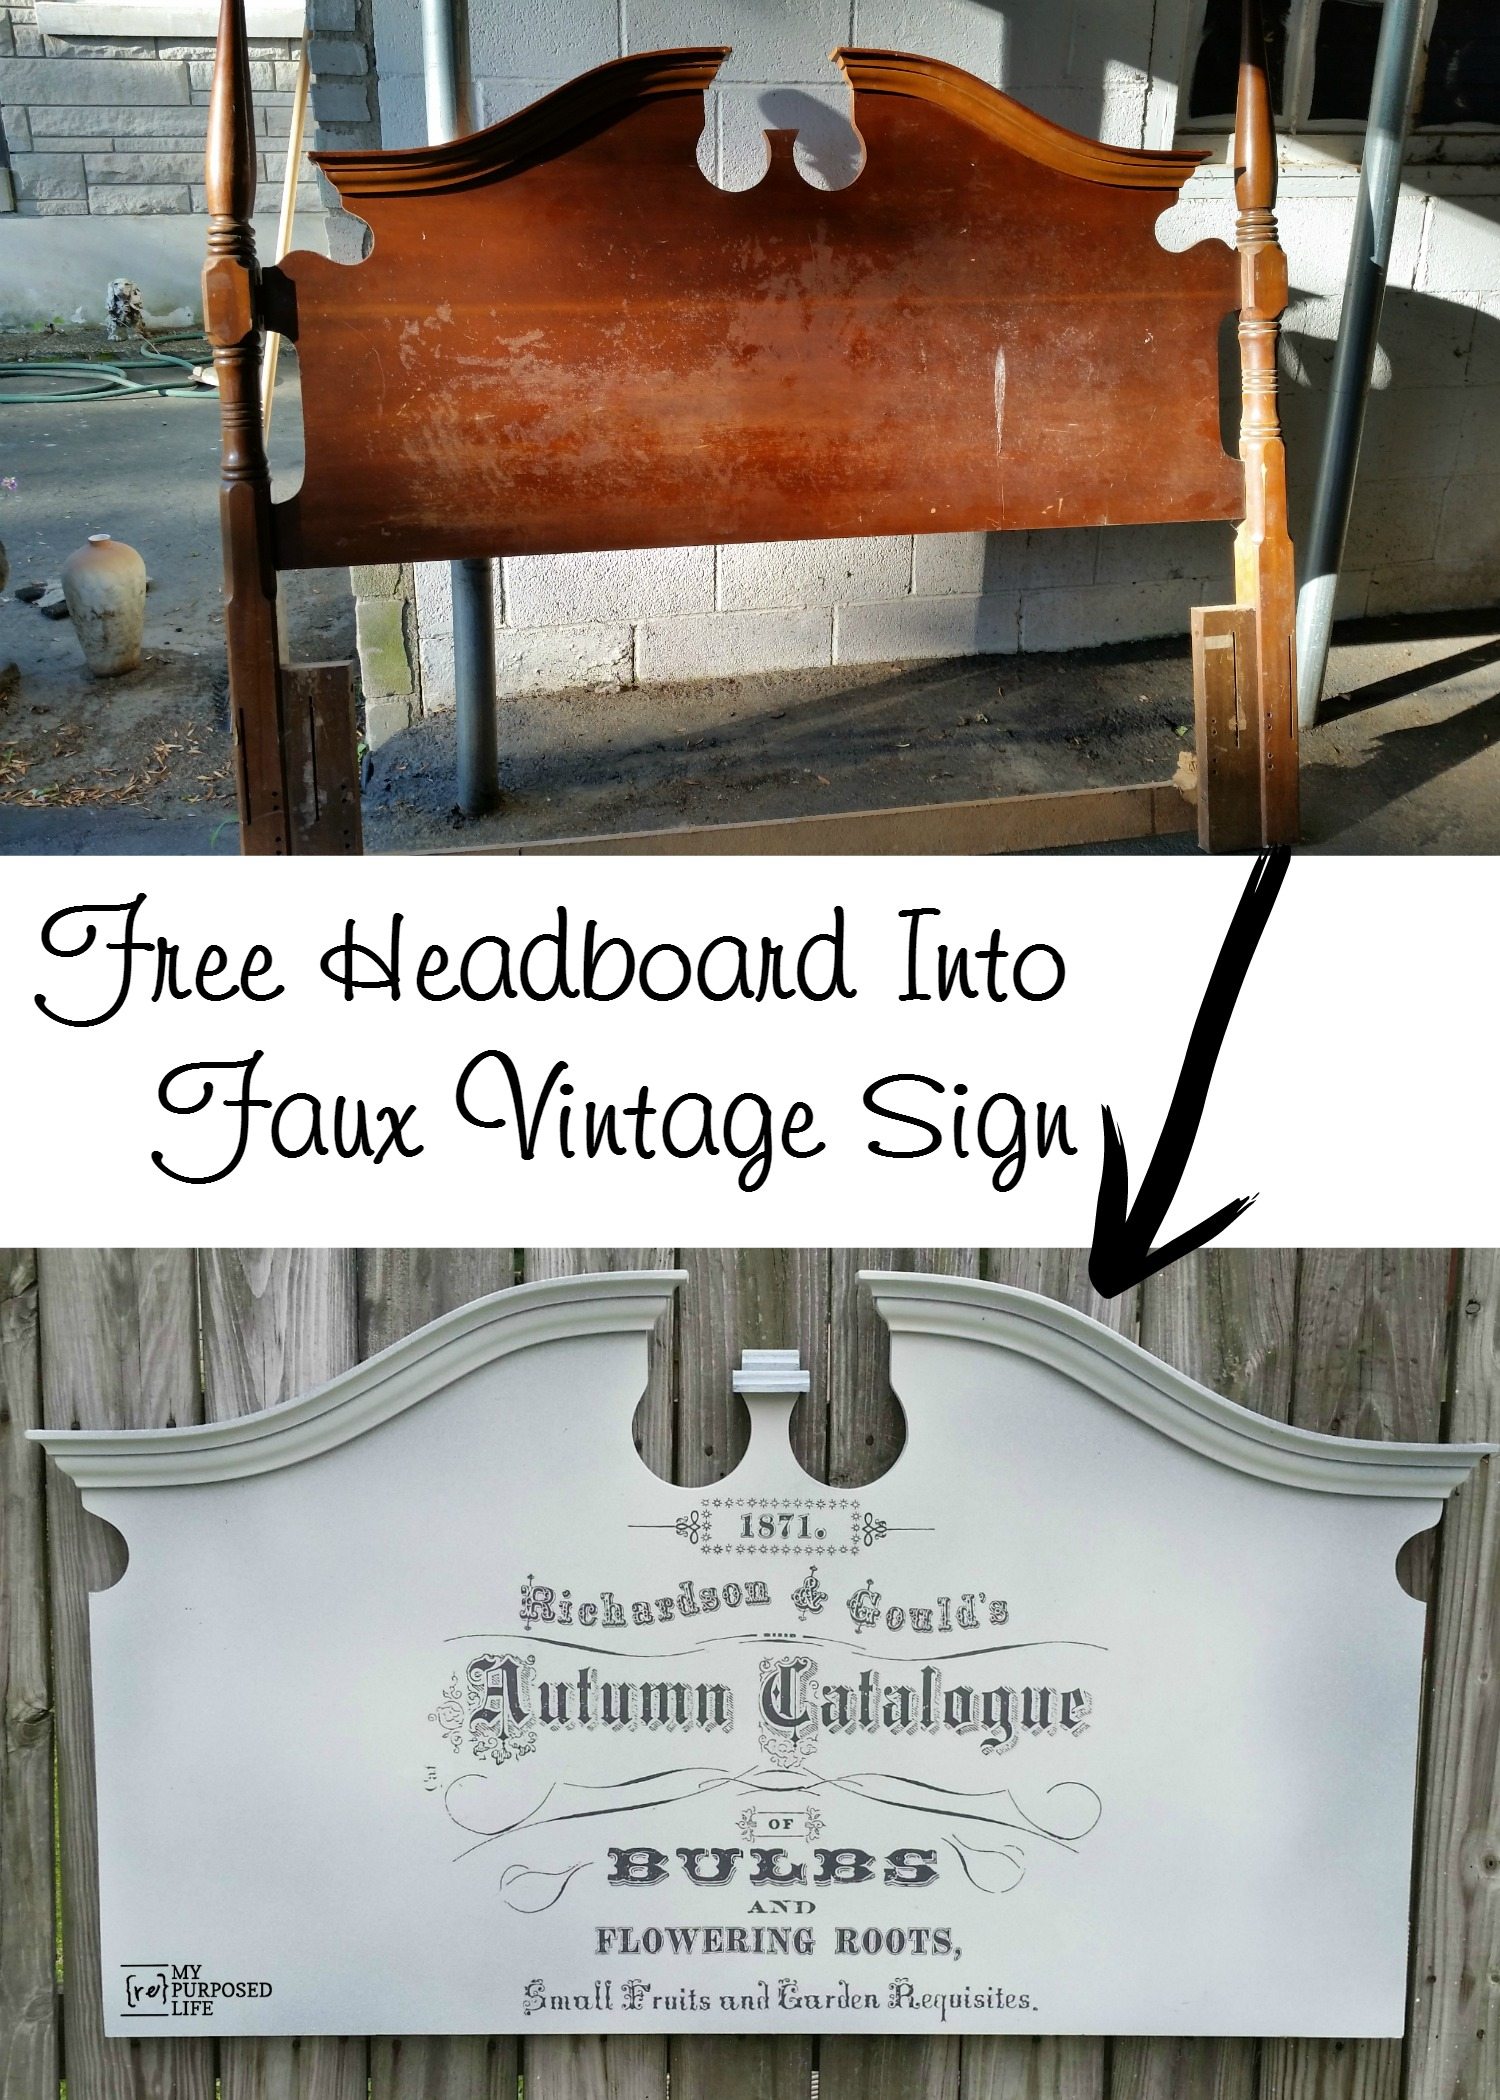 Easy tutorial to show you how to do a decor transfer on a piece of furniture. In this case, it's a repurposed headboard made into a sign. #MyRepurposedLife #repurposed #headboard #diy #sign #decortransfer #ironorchids via @repurposedlife